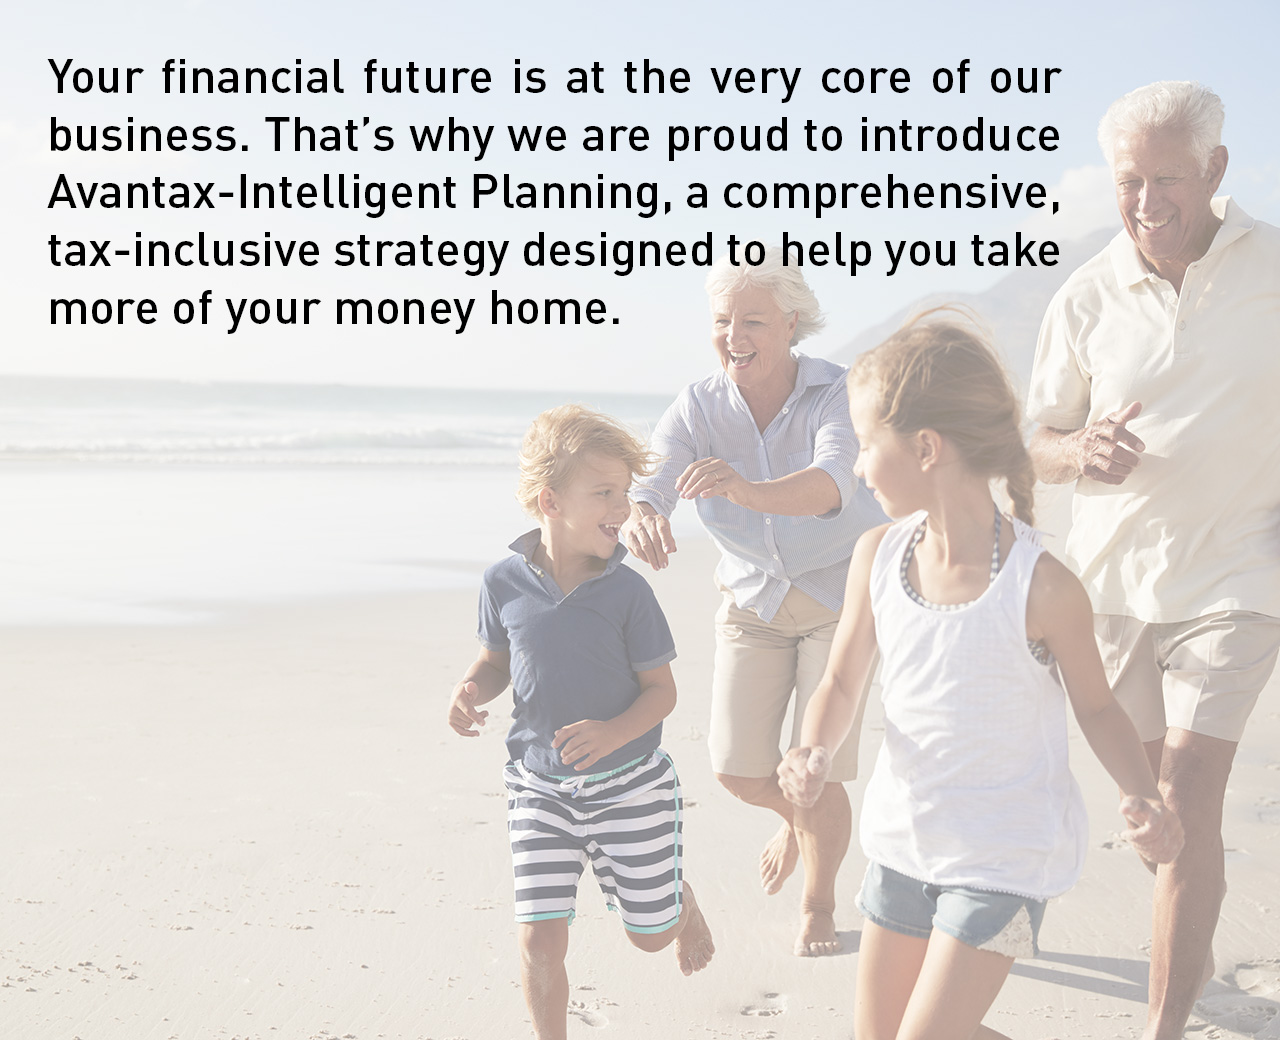 Your financial future is at the very core of our business. That's why we are proud to introduce Avantax-Intelligent Planning, a comprehensive, tax-inclusive strategy designed to help you take more of your money home.